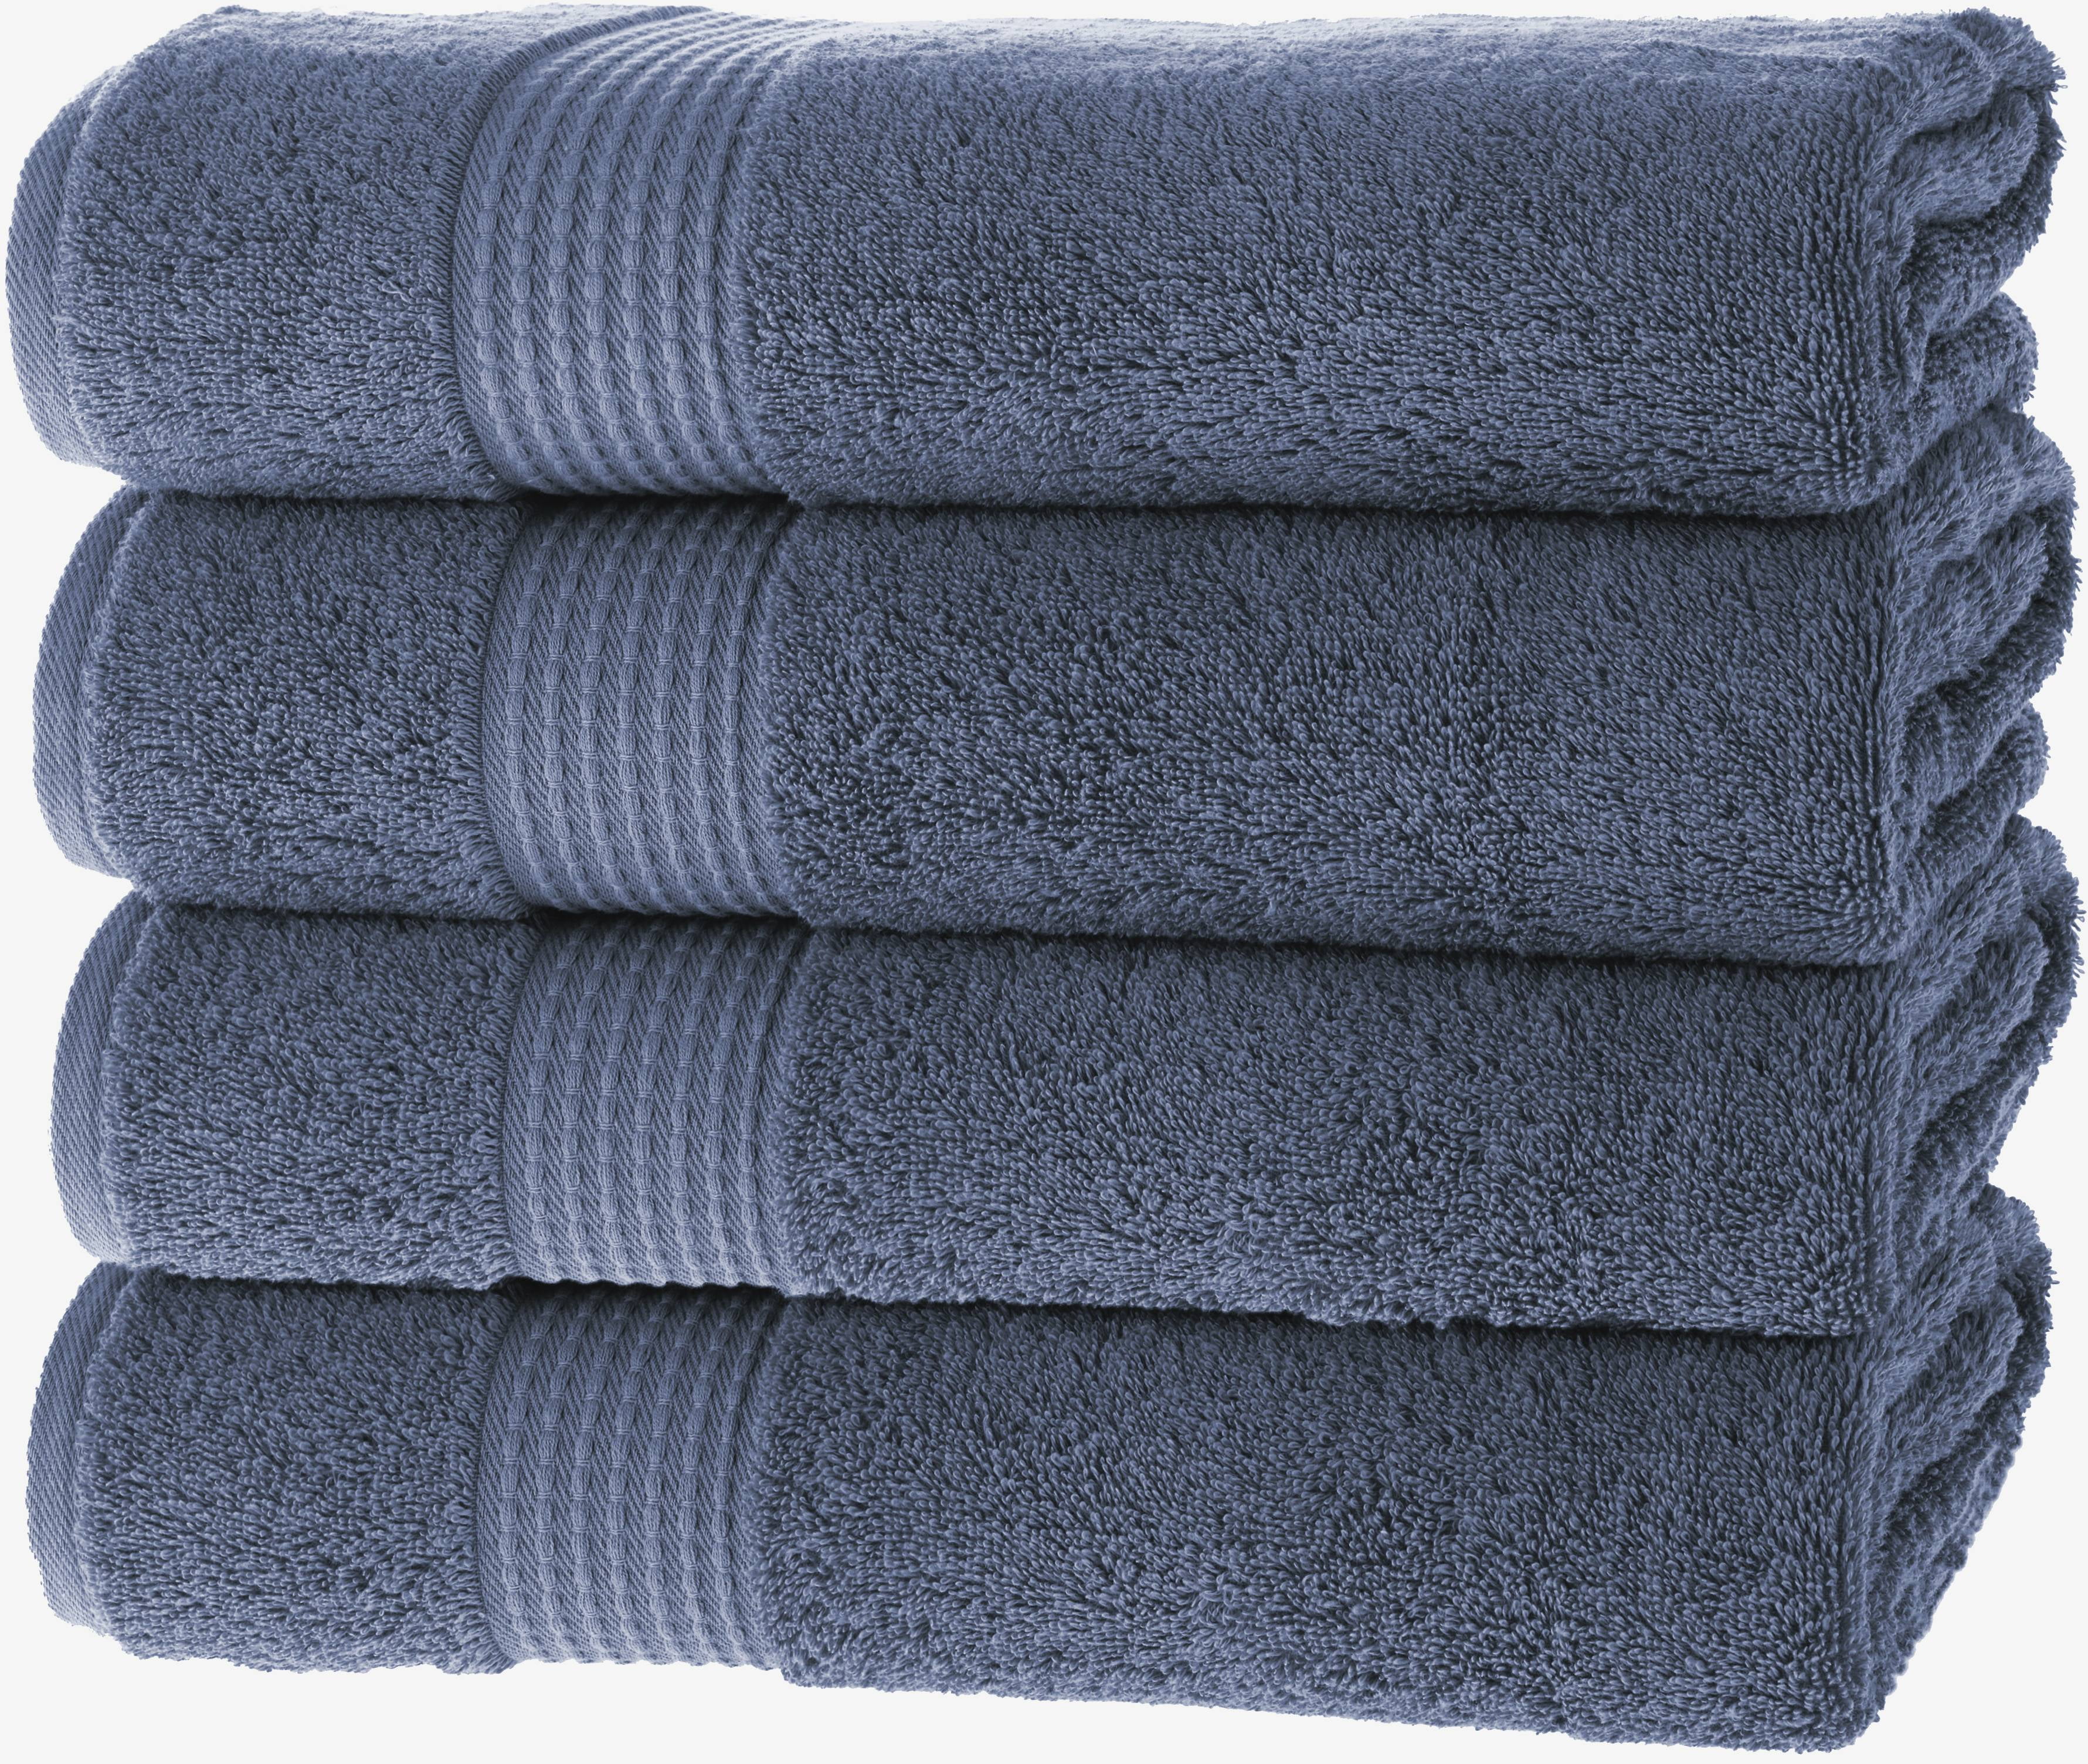  Maura Basics Performance Wash Cloths with Hanging Loop. 13”x13”  American Standard Towel Size. Soft, Durable, Long Lasting and Absorbent